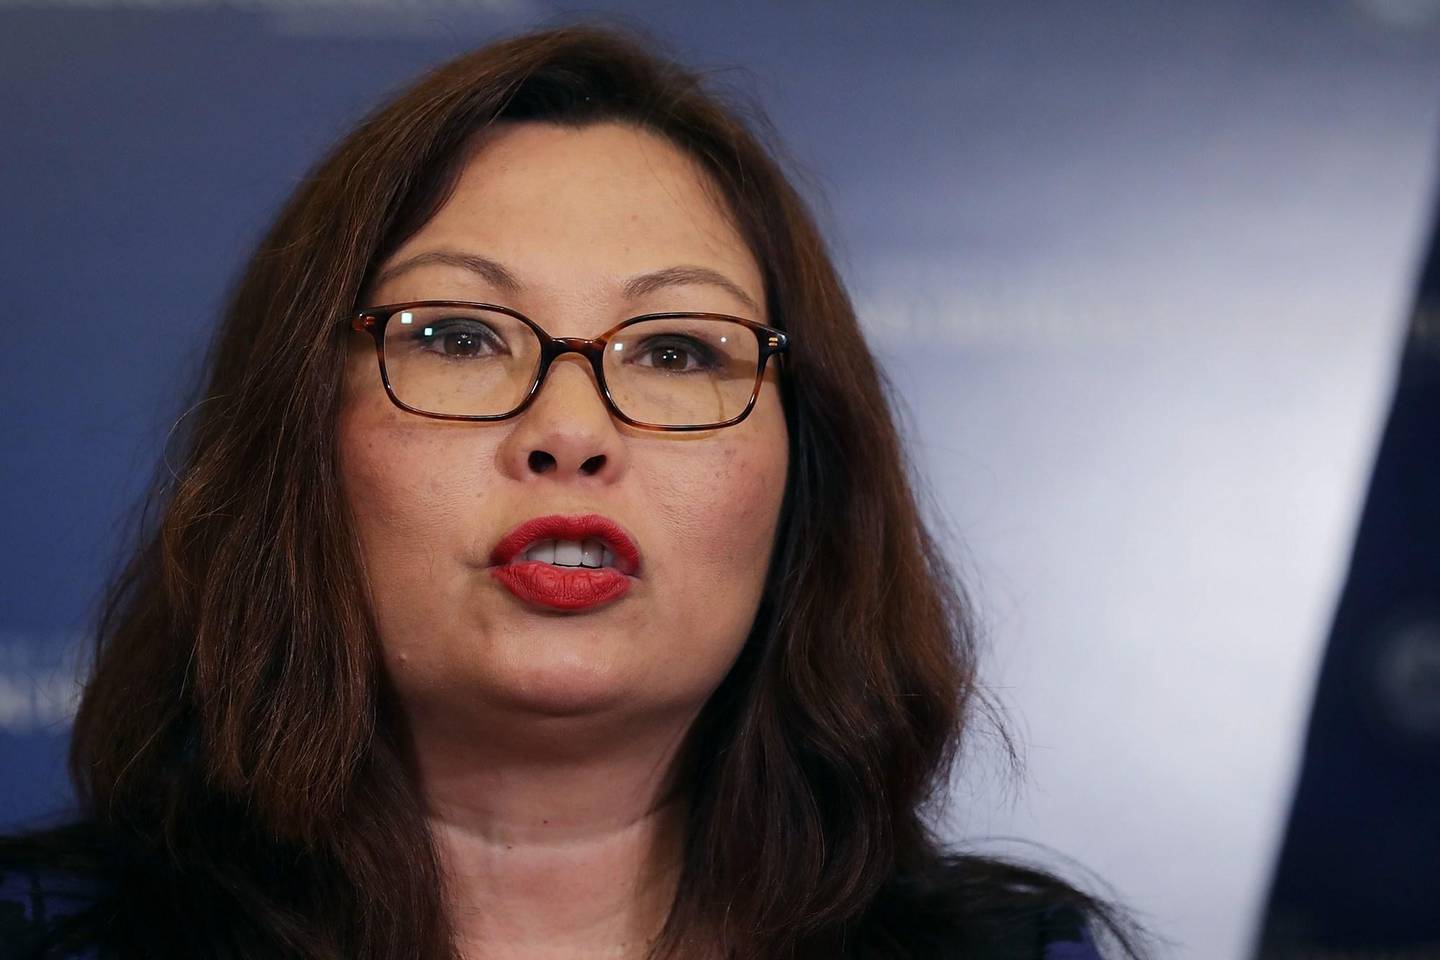 WASHINGTON, DC - JULY 11: Sen. Tammy Duckworth (D-IL) speaks during a news conference about resisting the Trump Administration's Presidential Advisory Commission on Election Integrity with at the U.S. Capitol July 11, 2017 in Washington, DC. Citing no evidence of widespread voter fraud in the United States, Duckworth said the commission is an attempt at voter suppression and a threat to cyber security for America's 200 million registered voters.   Chip Somodevilla/Getty Images/AFP
== FOR NEWSPAPERS, INTERNET, TELCOS & TELEVISION USE ONLY ==